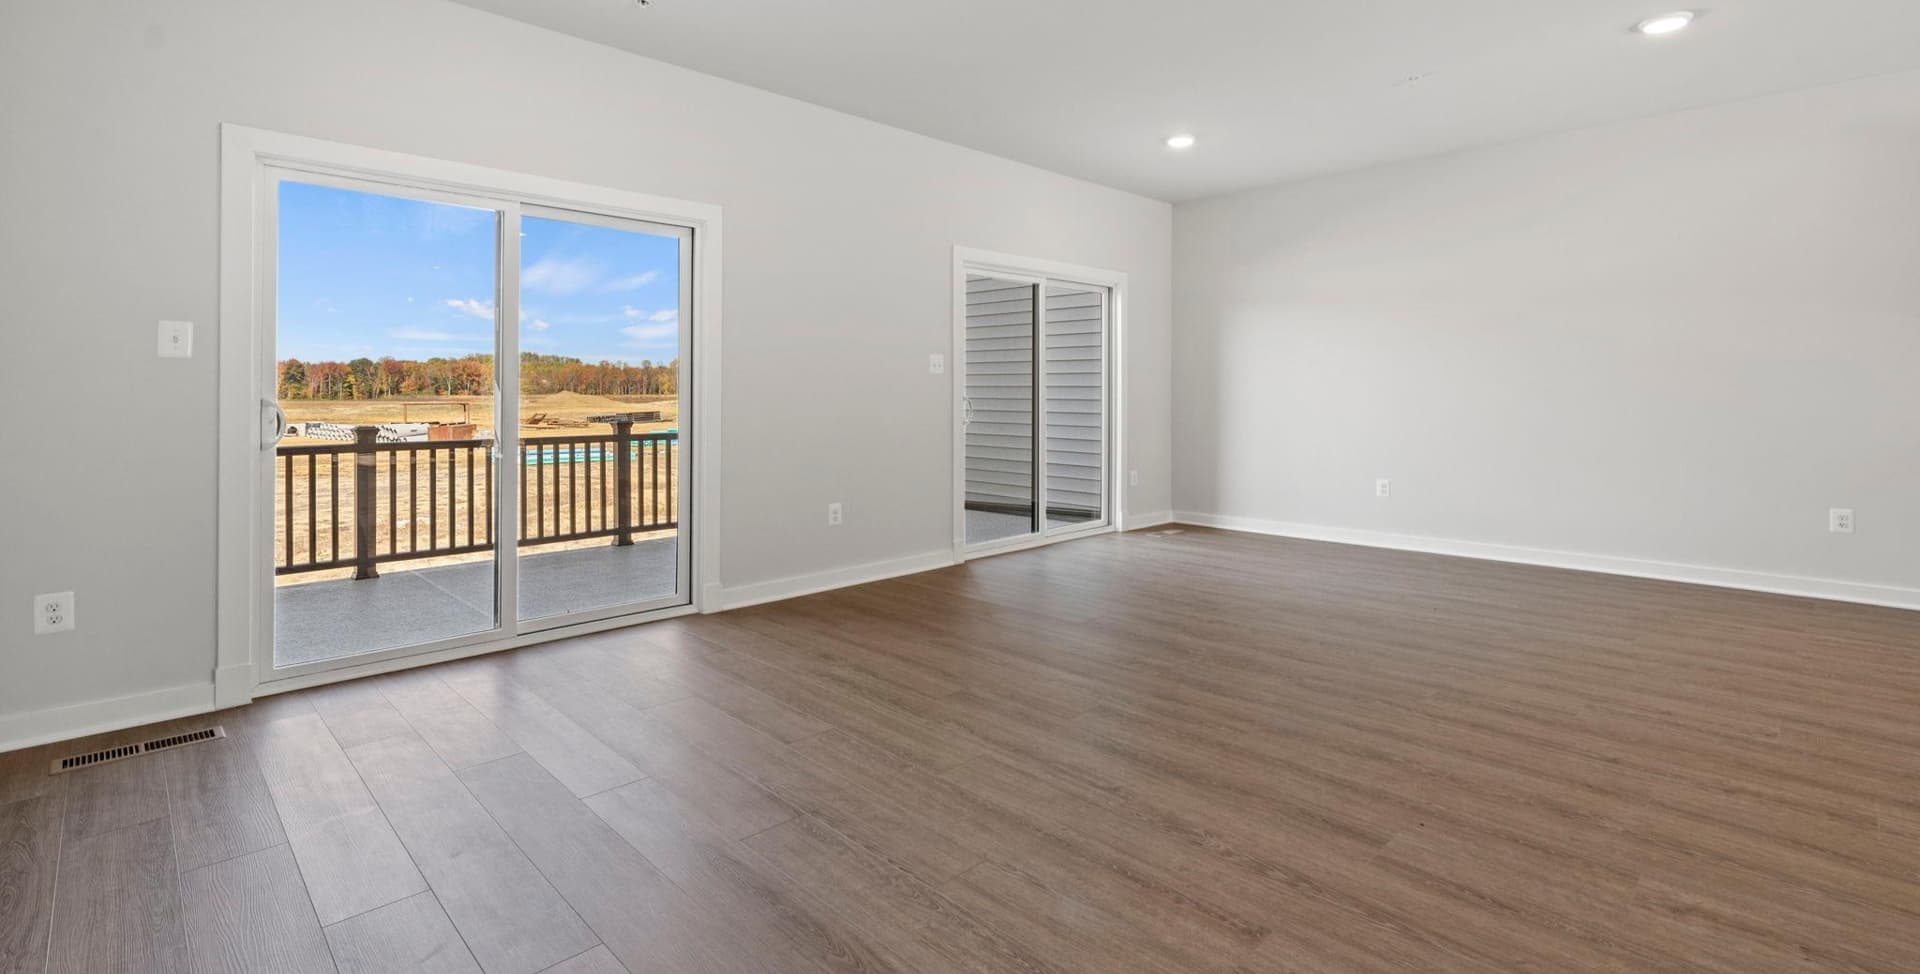 gallery image for 22B The Vista at South Lake